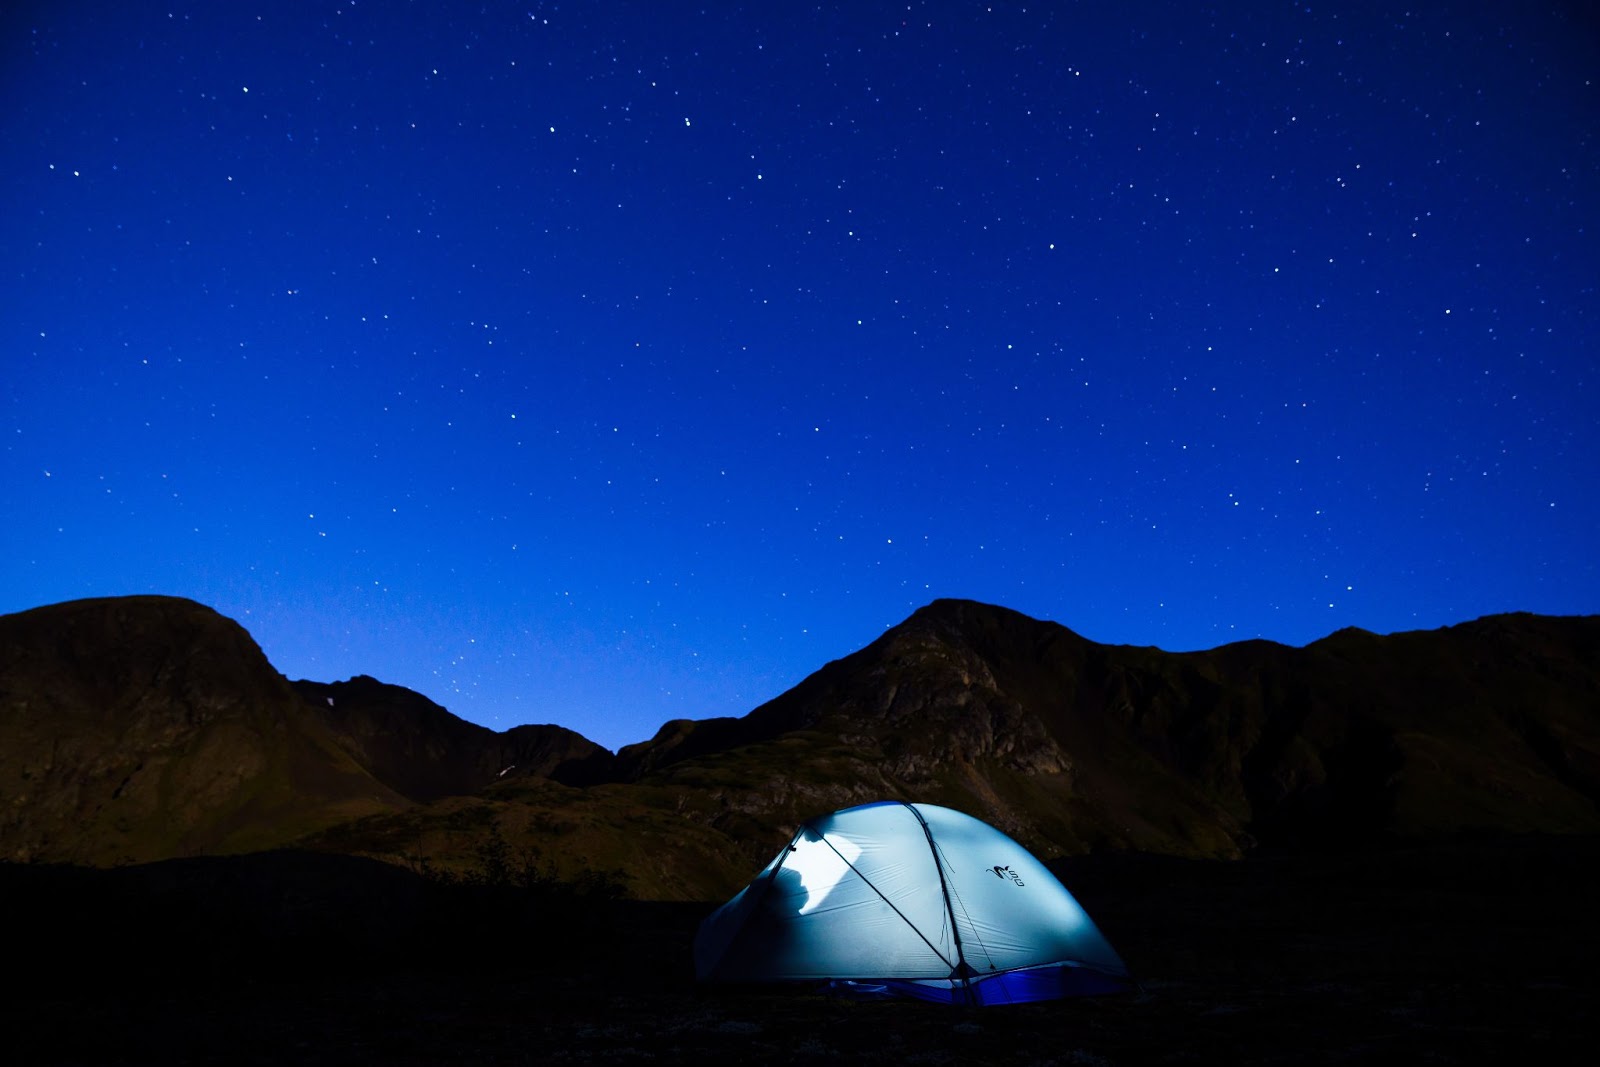 camping in wilderness under a sky full of stars